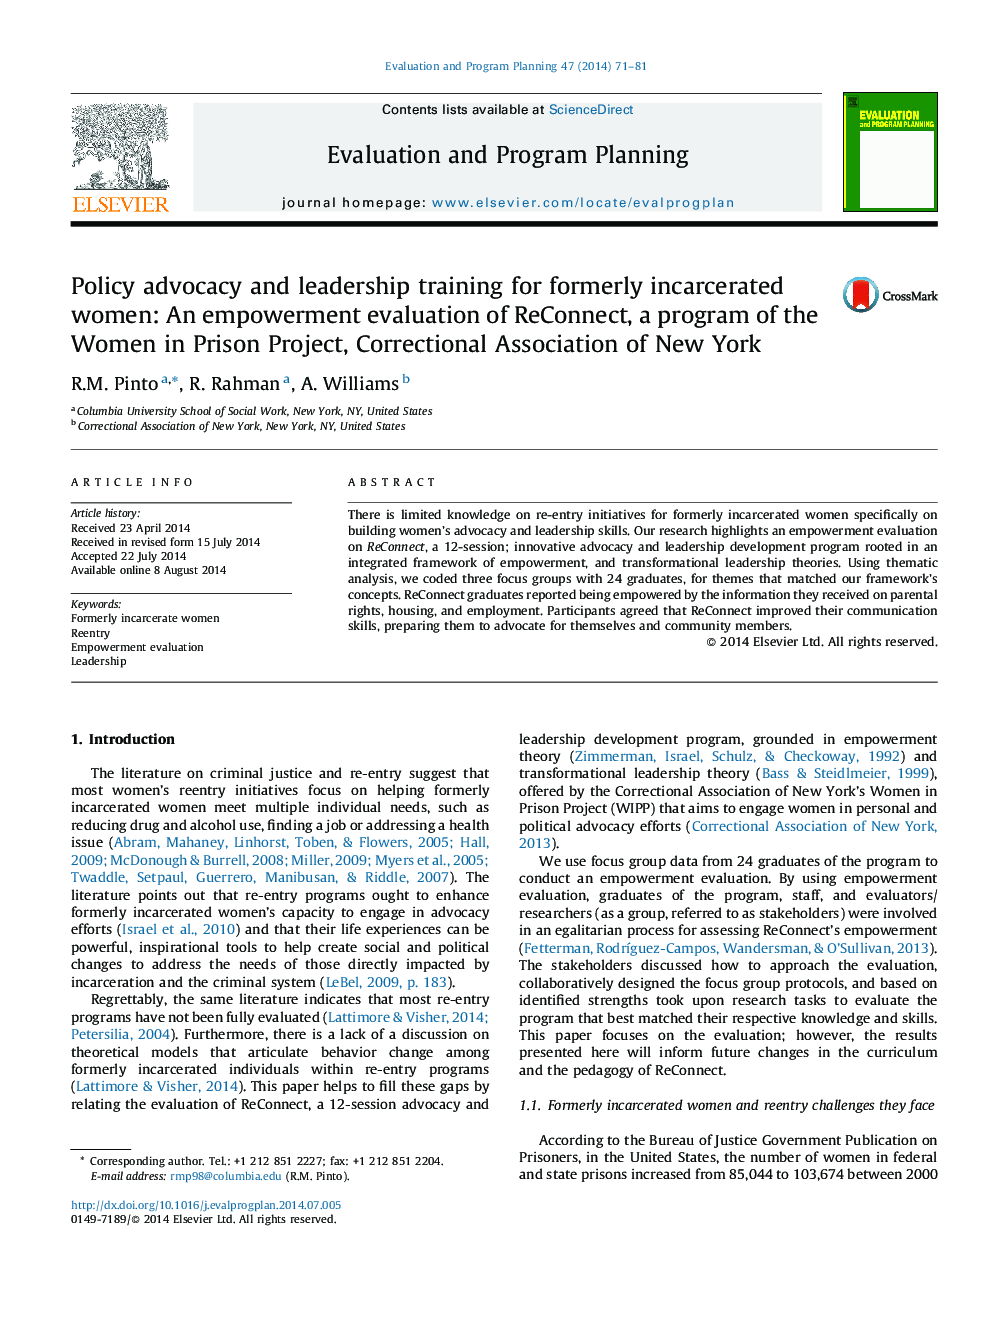 Policy advocacy and leadership training for formerly incarcerated women: An empowerment evaluation of ReConnect, a program of the Women in Prison Project, Correctional Association of New York